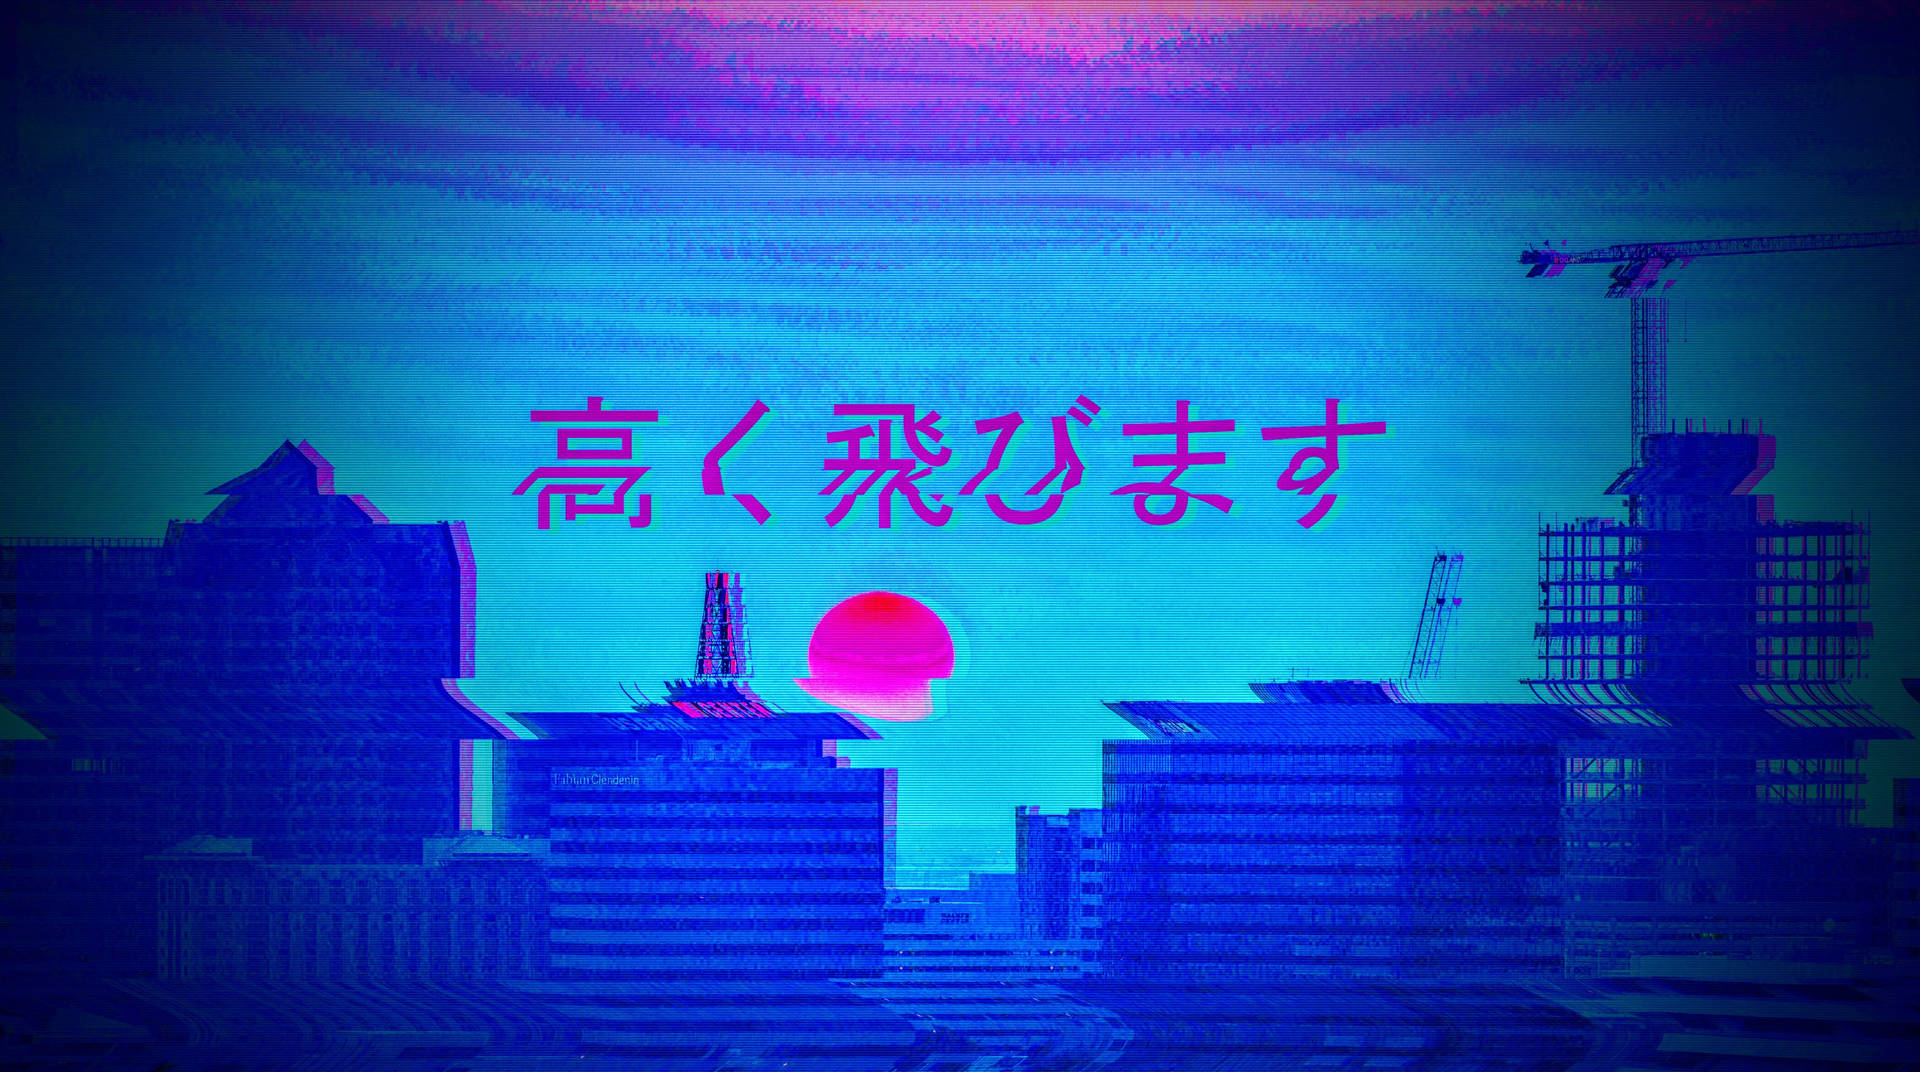 The Neon Lights of the City Shine Brightly in a Vaporwave Japan Wallpaper